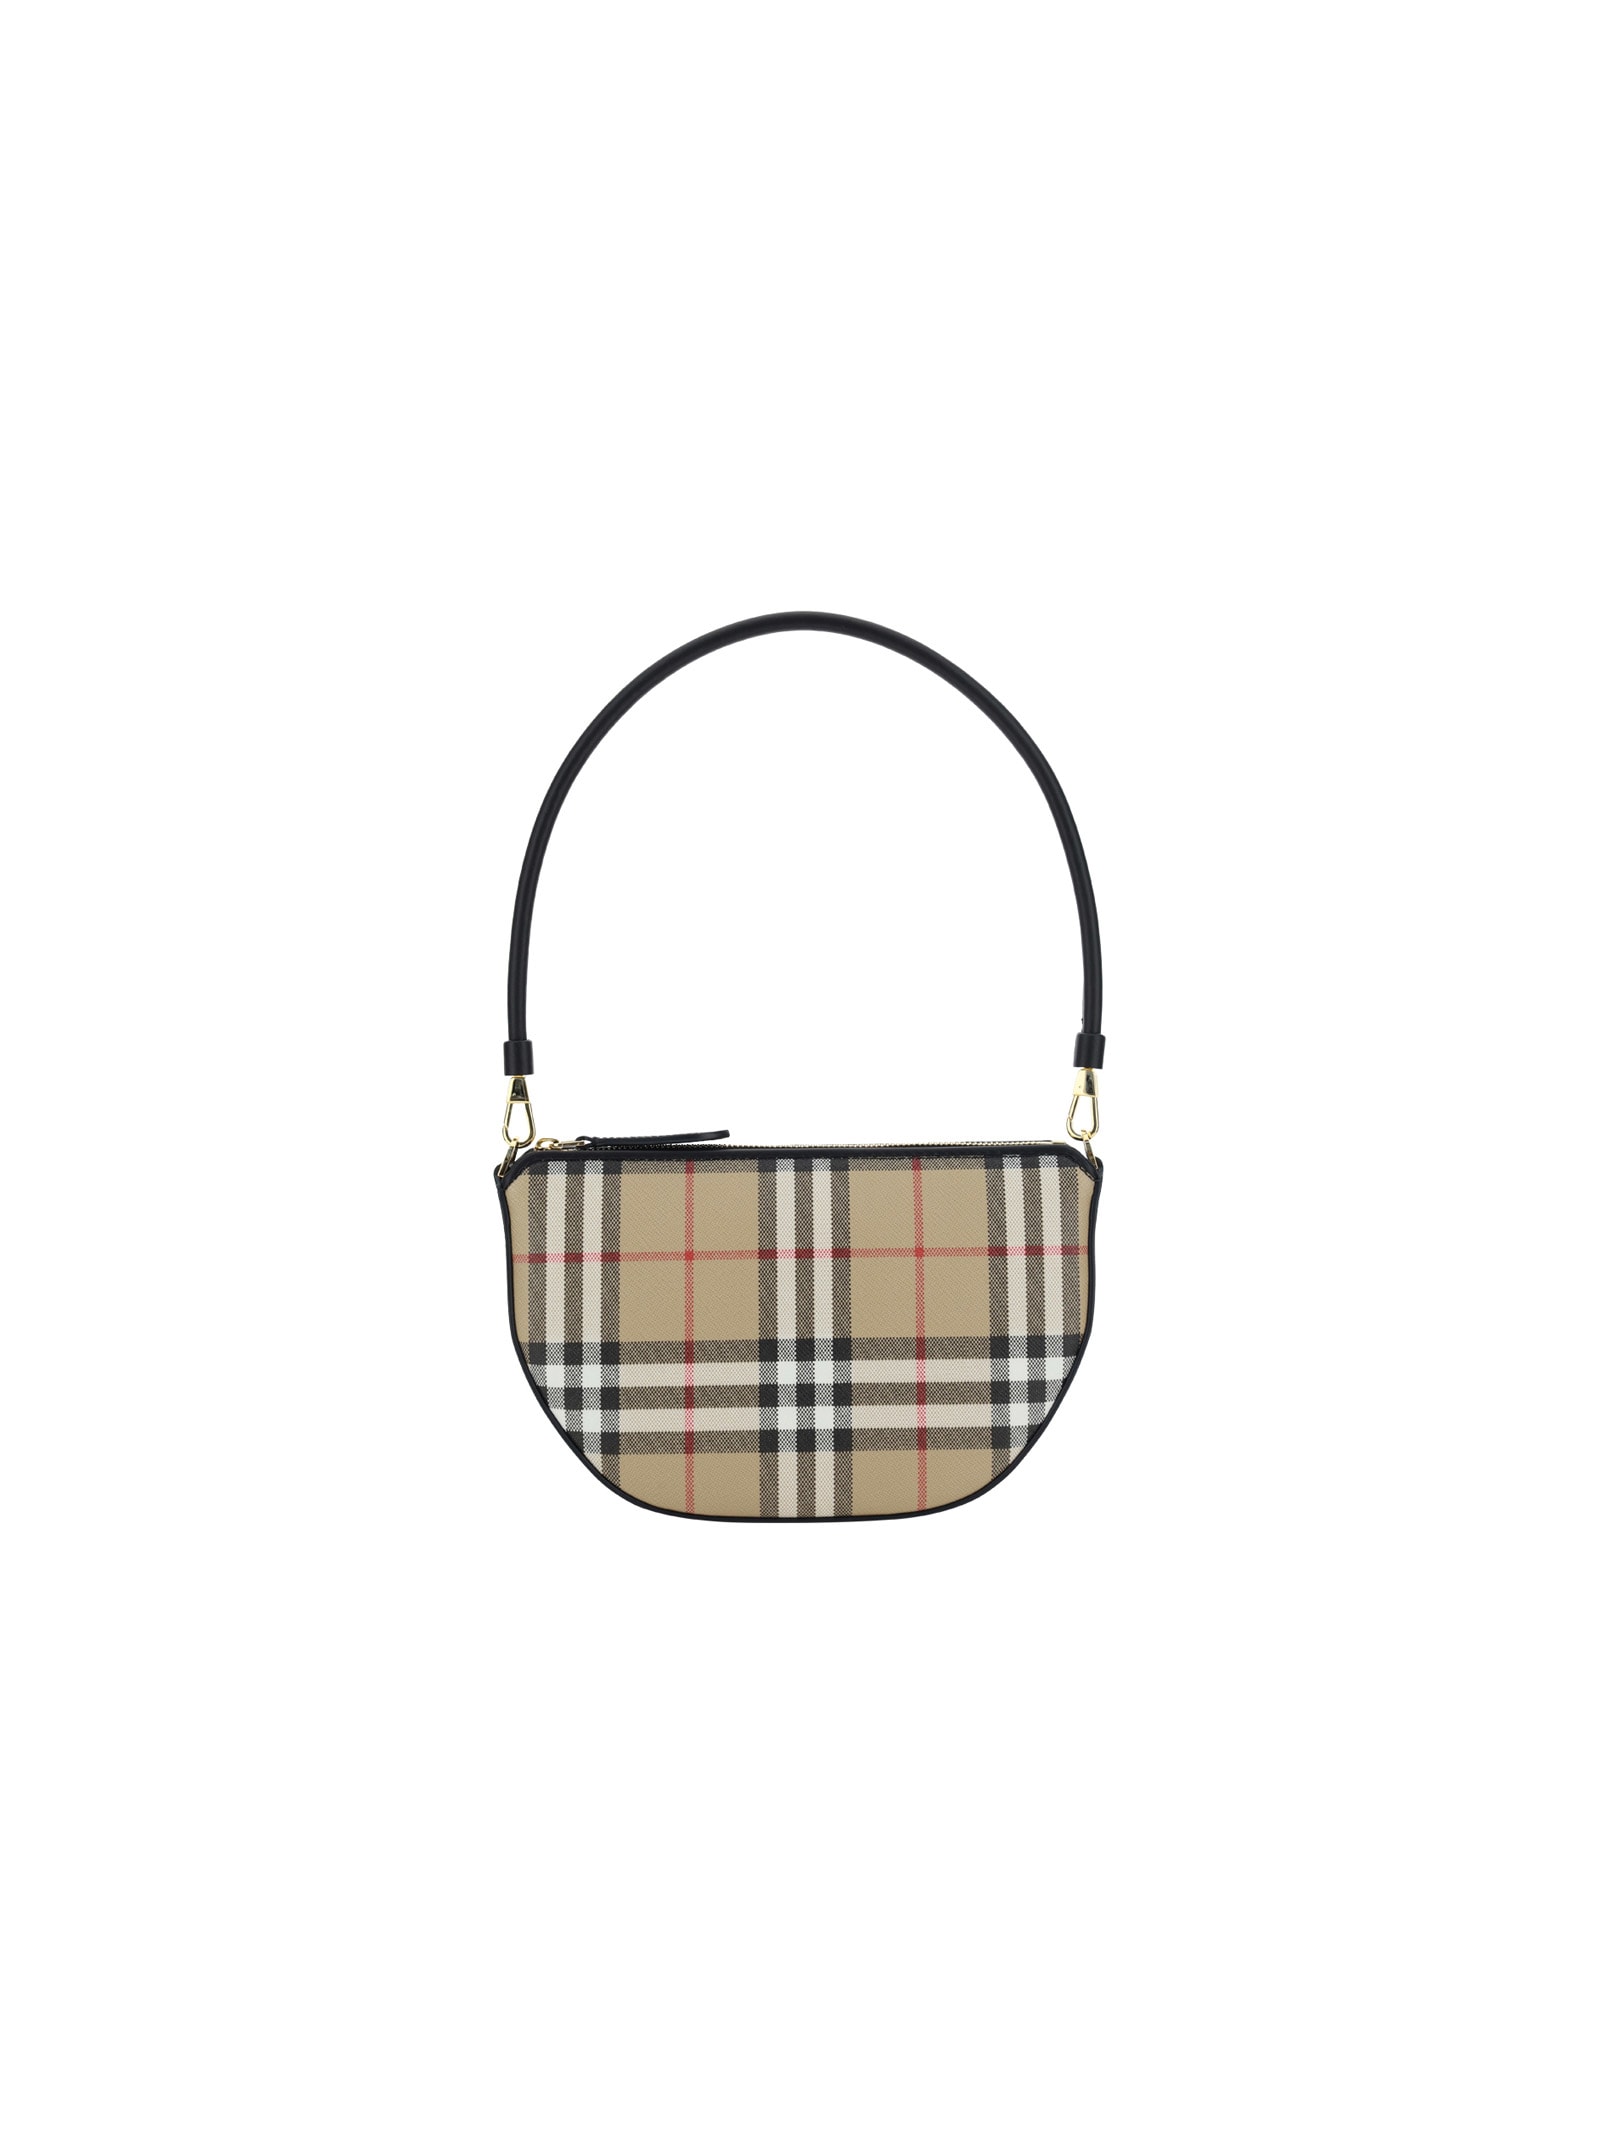 Burberry New Olympia Shoulder Bag In /black | ModeSens